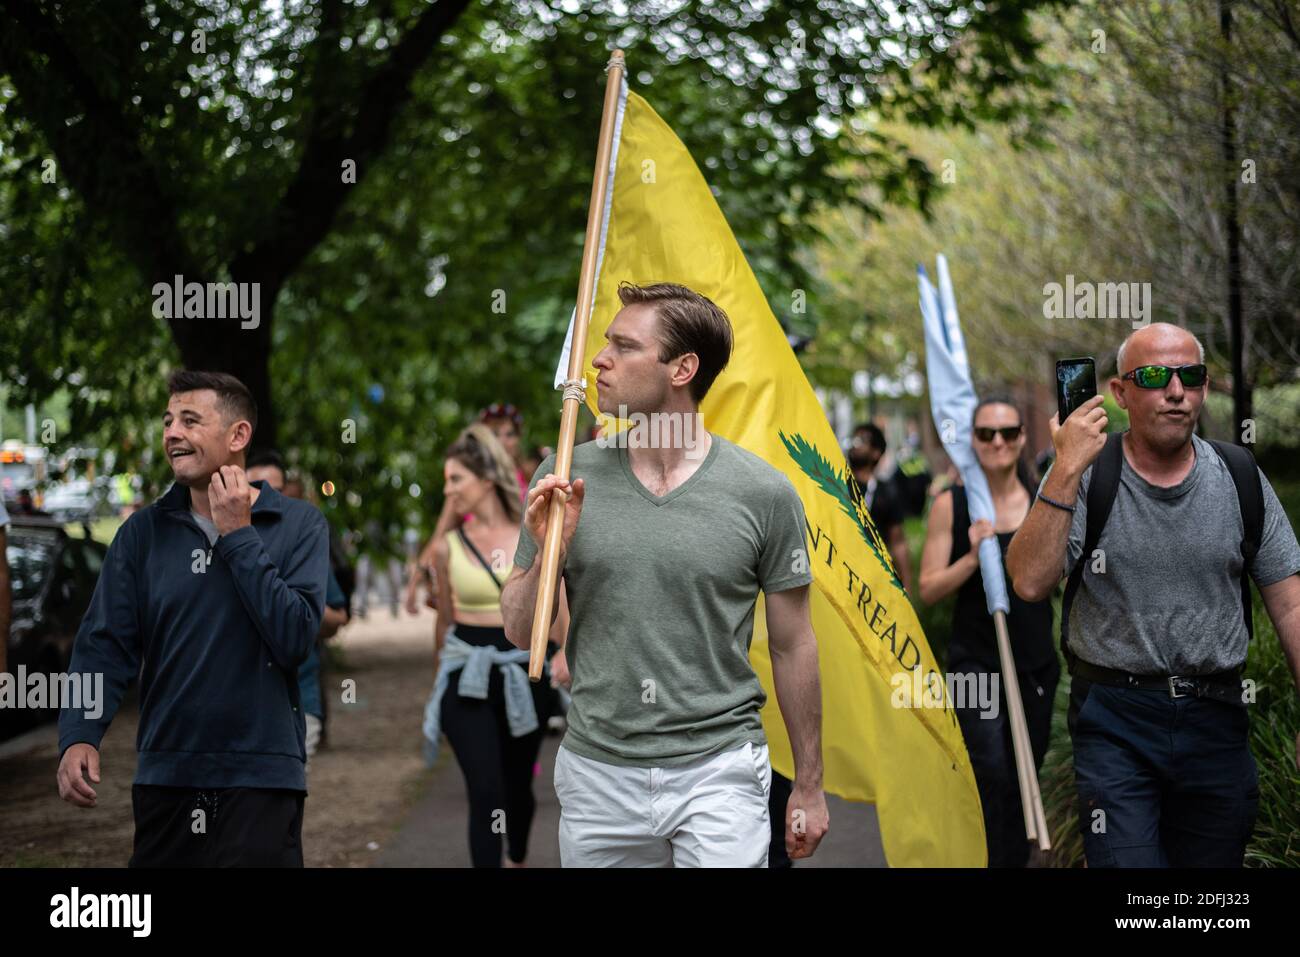 A protester marching with a “DON’T TREAD ON ME” flag at Saturday’s Melbourne Freedom Rally. Stock Photo